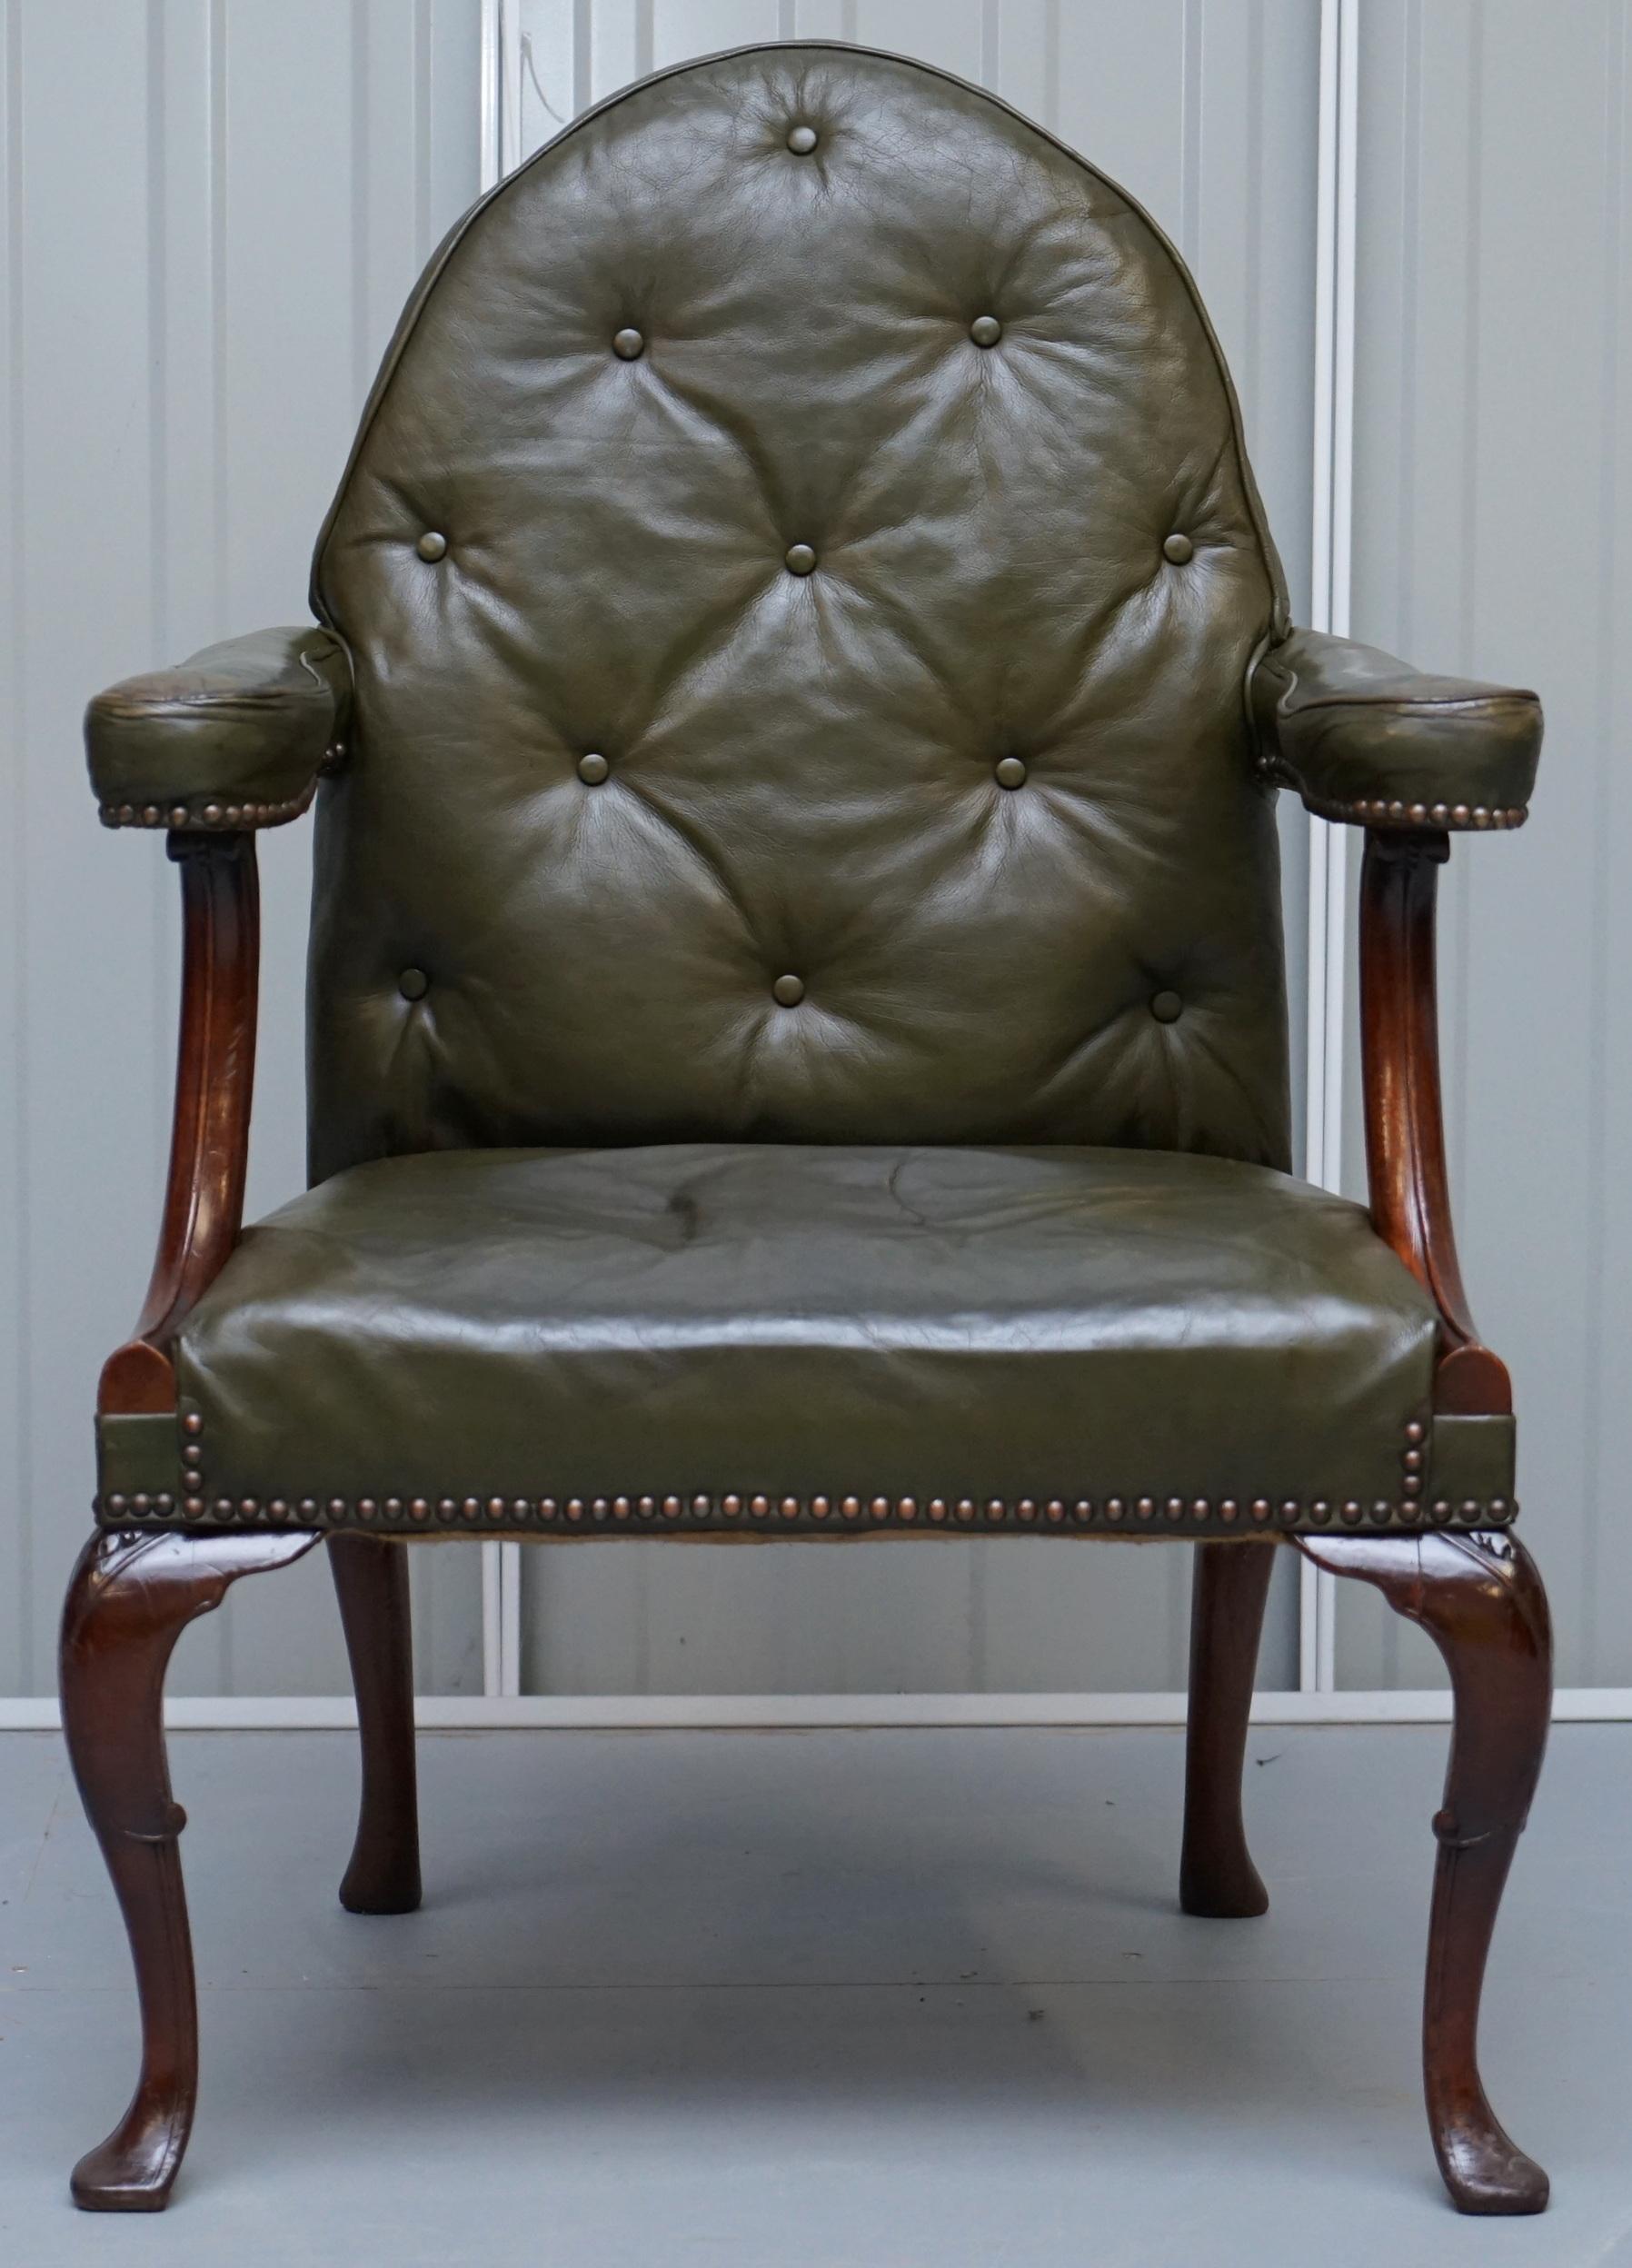 We are delighted to offer for sale this very rare original steeple back circa 1800 Georgian Irish in the Gothic revival manor armchair

A very good looking collectable and decorative armchair. It’s made after the early Gothic designs which were in